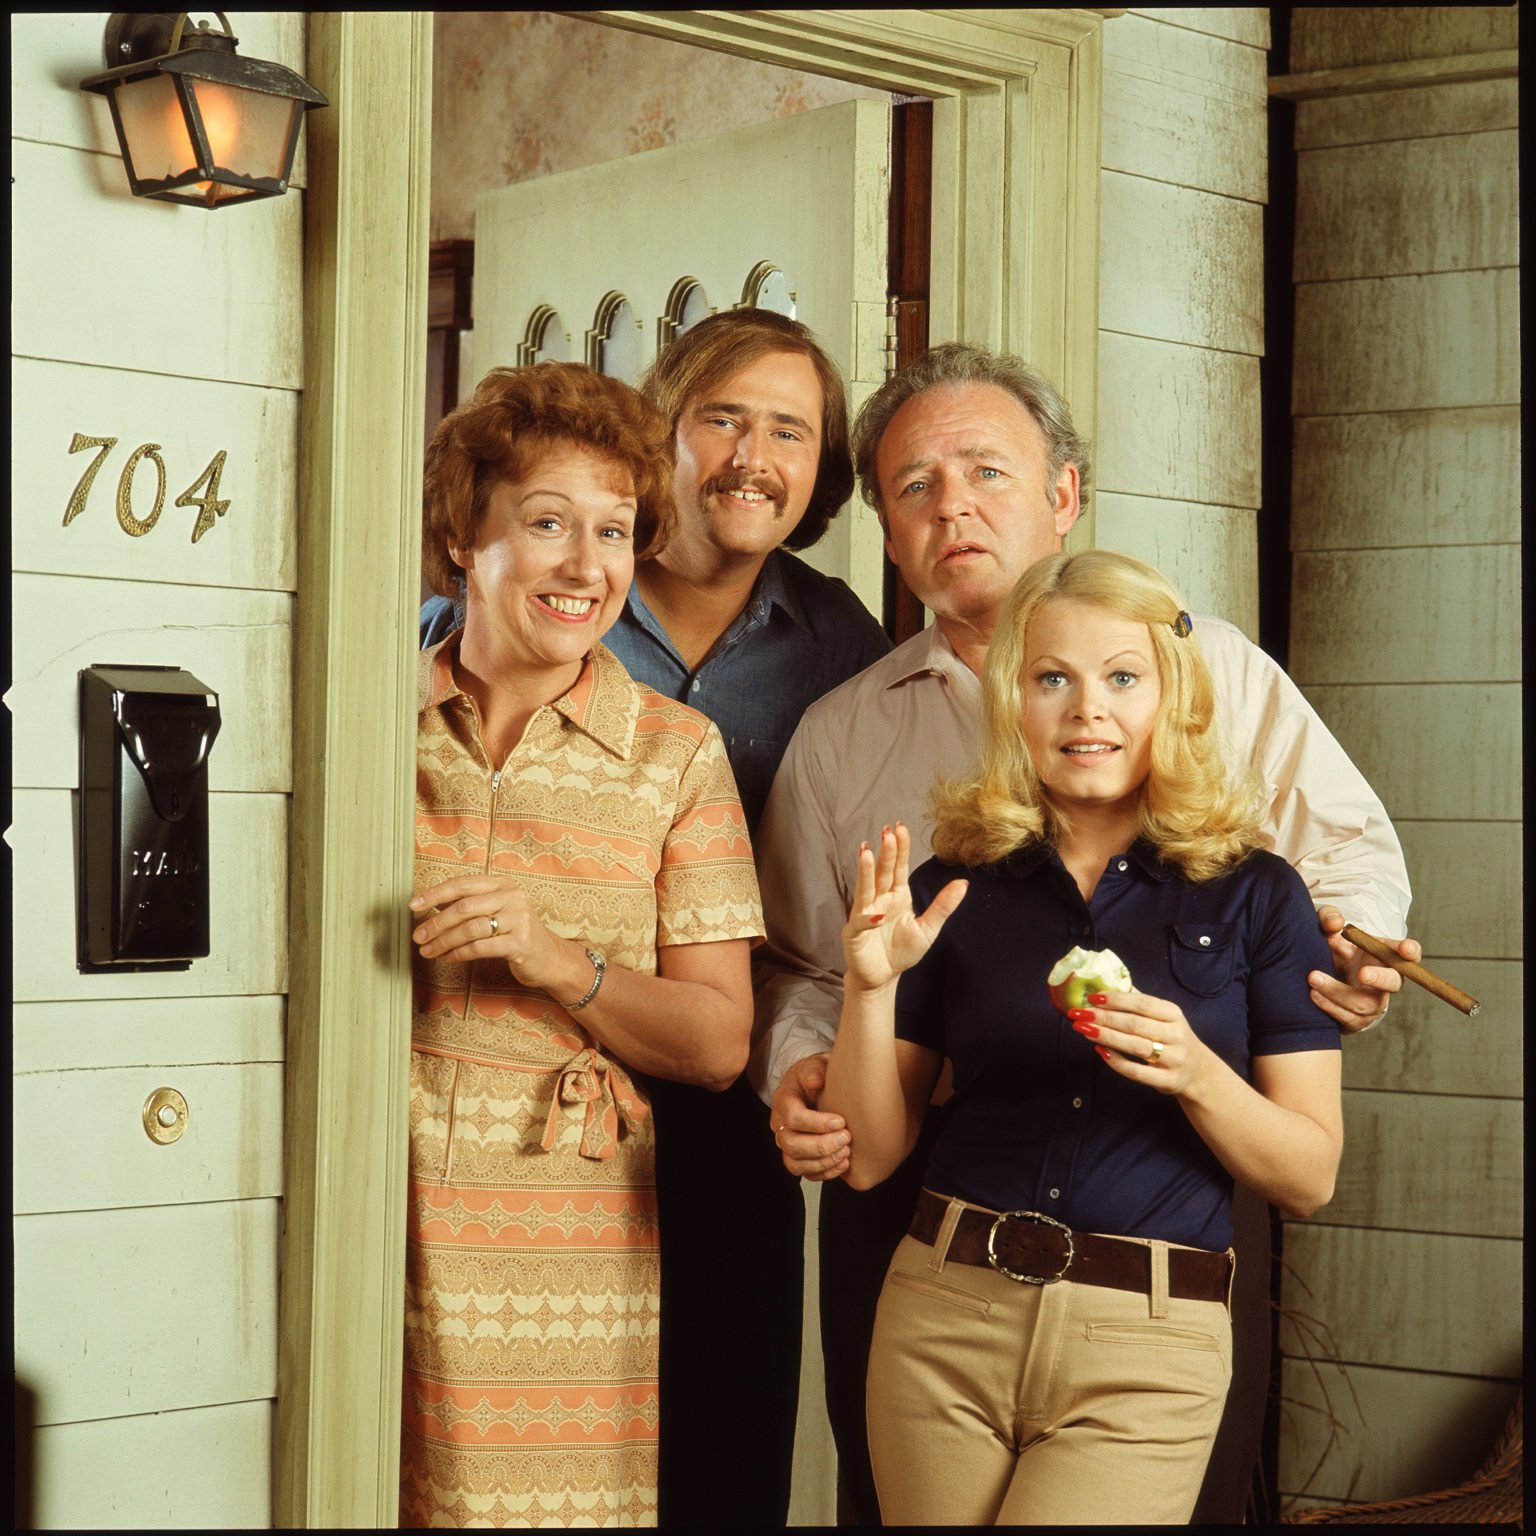 The 'All in the Family,'  cast as seen from left are, Jean Stapleton, Rob Reiner, Carroll O'Connor (1924 - 2001), and Sally Struthers. | Source: Getty Images.